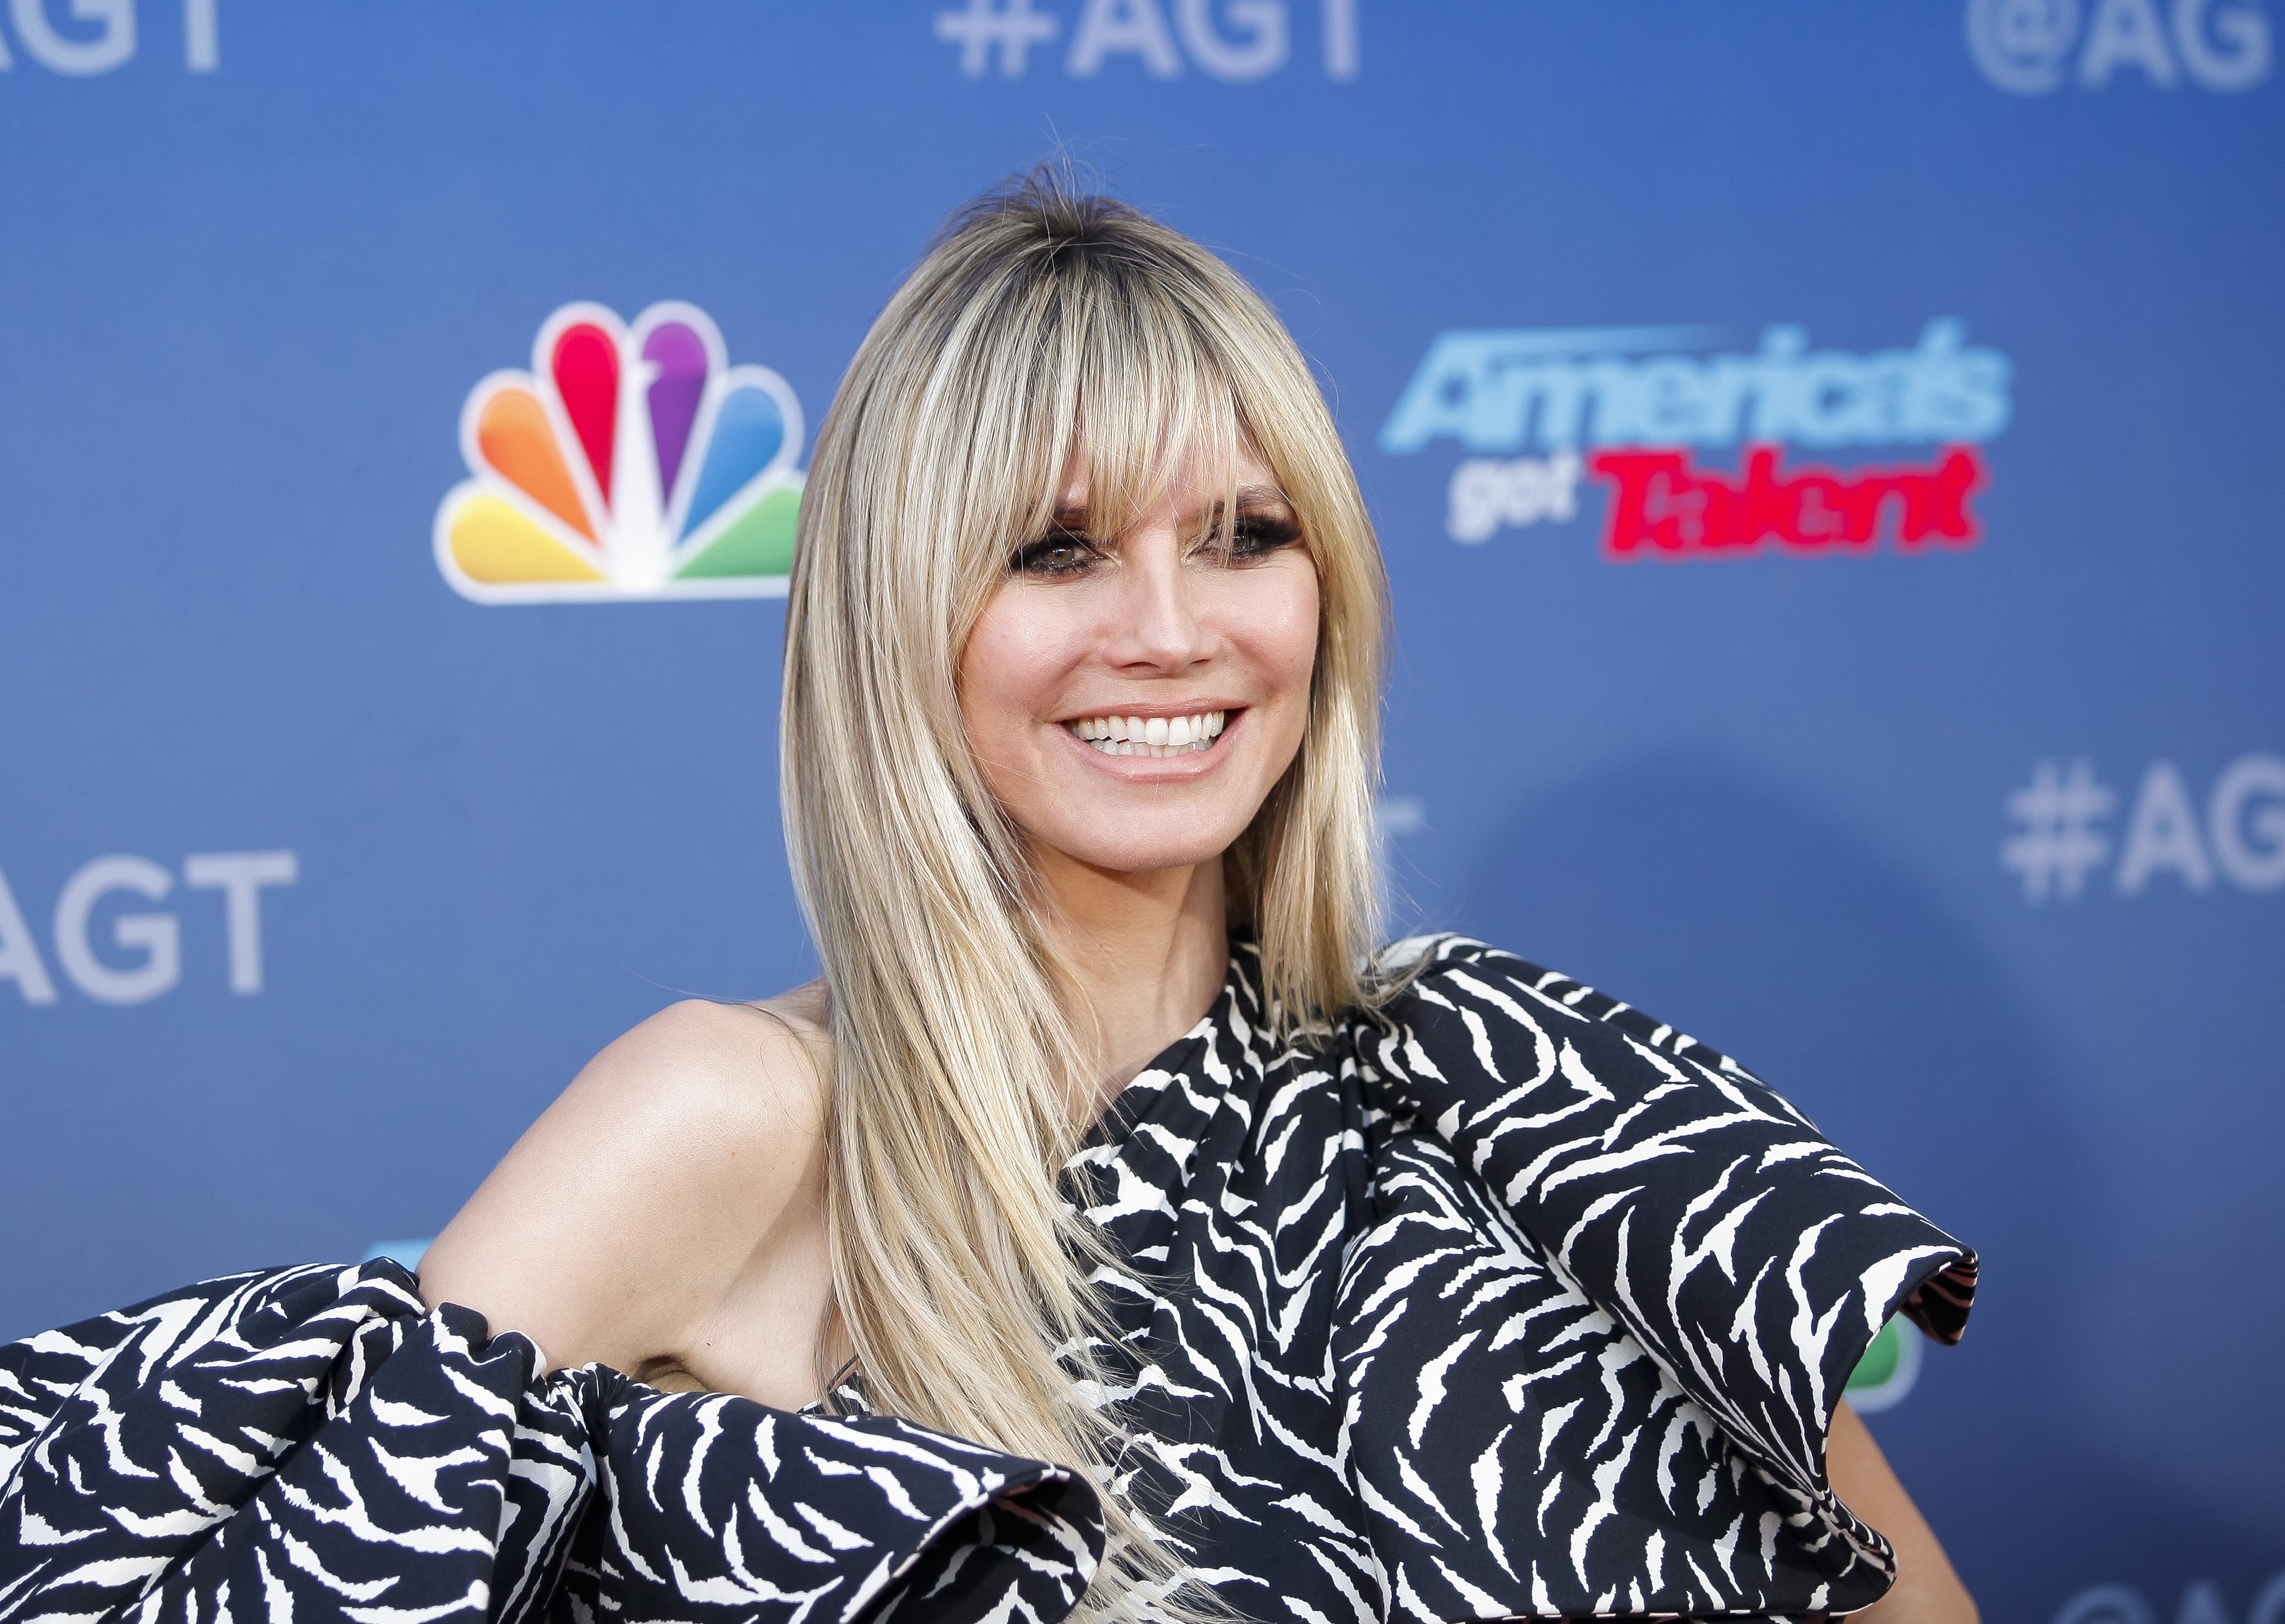 Heidi Klum attends season 15 of "America's Got Talent" in Pasadena, California on March 4, 2020. | Photo: Getty Images